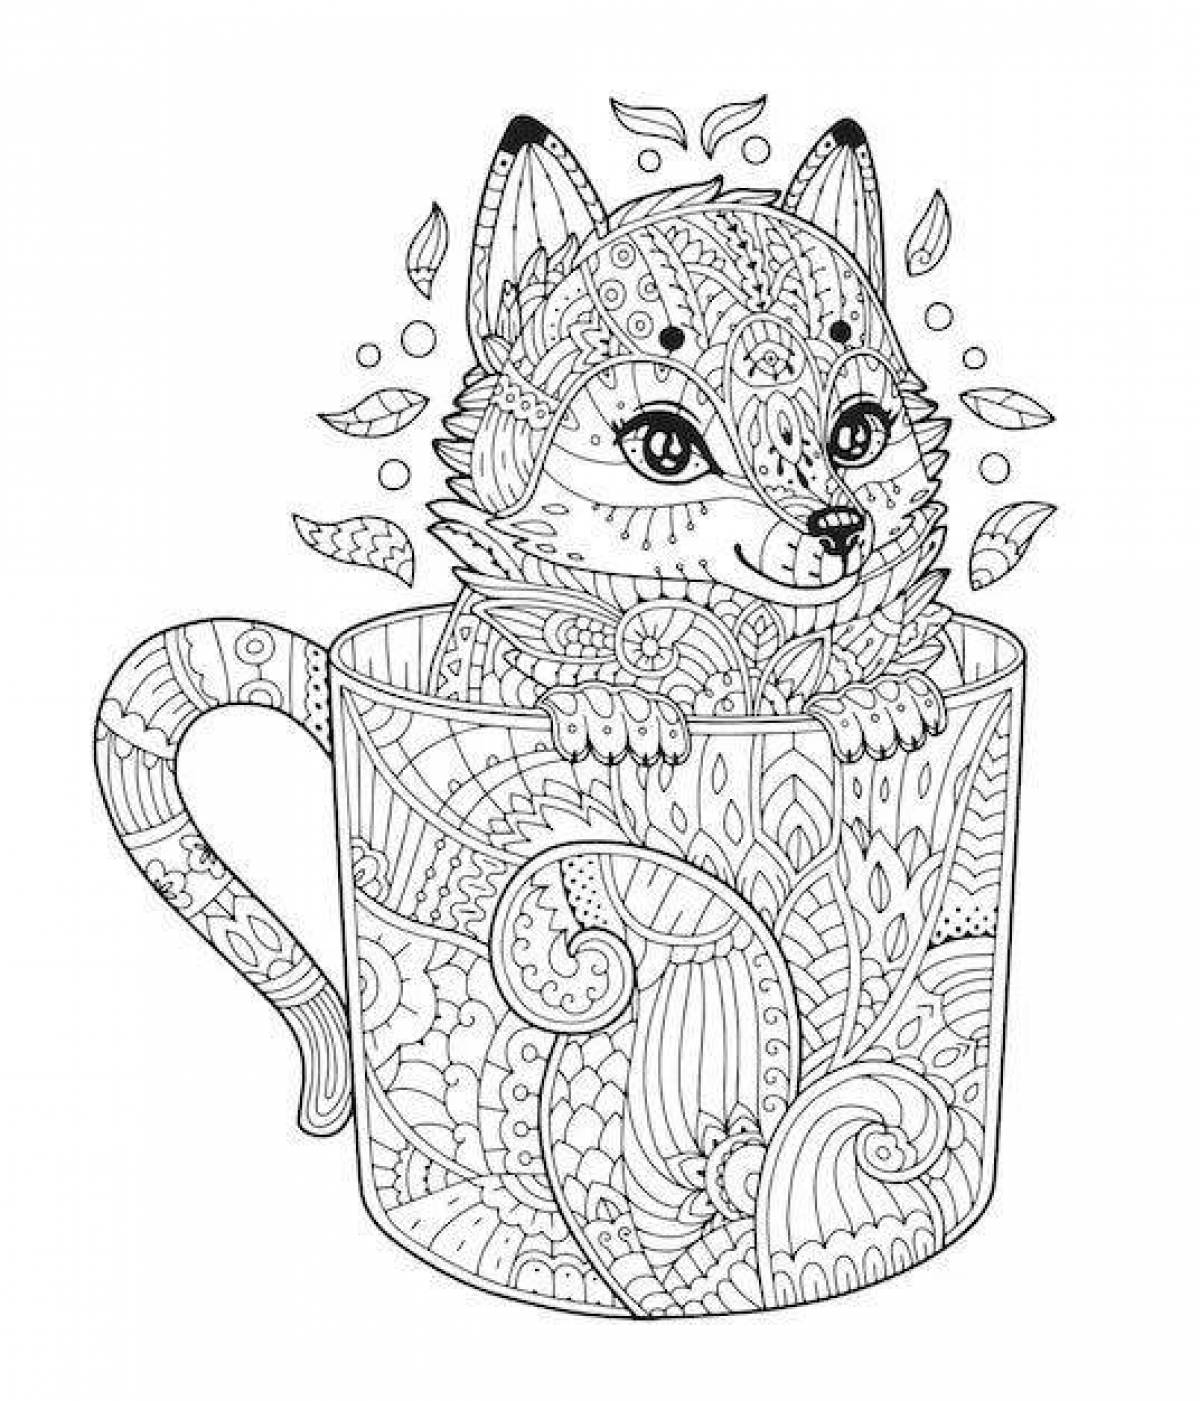 Coloring page witty cat in a mug